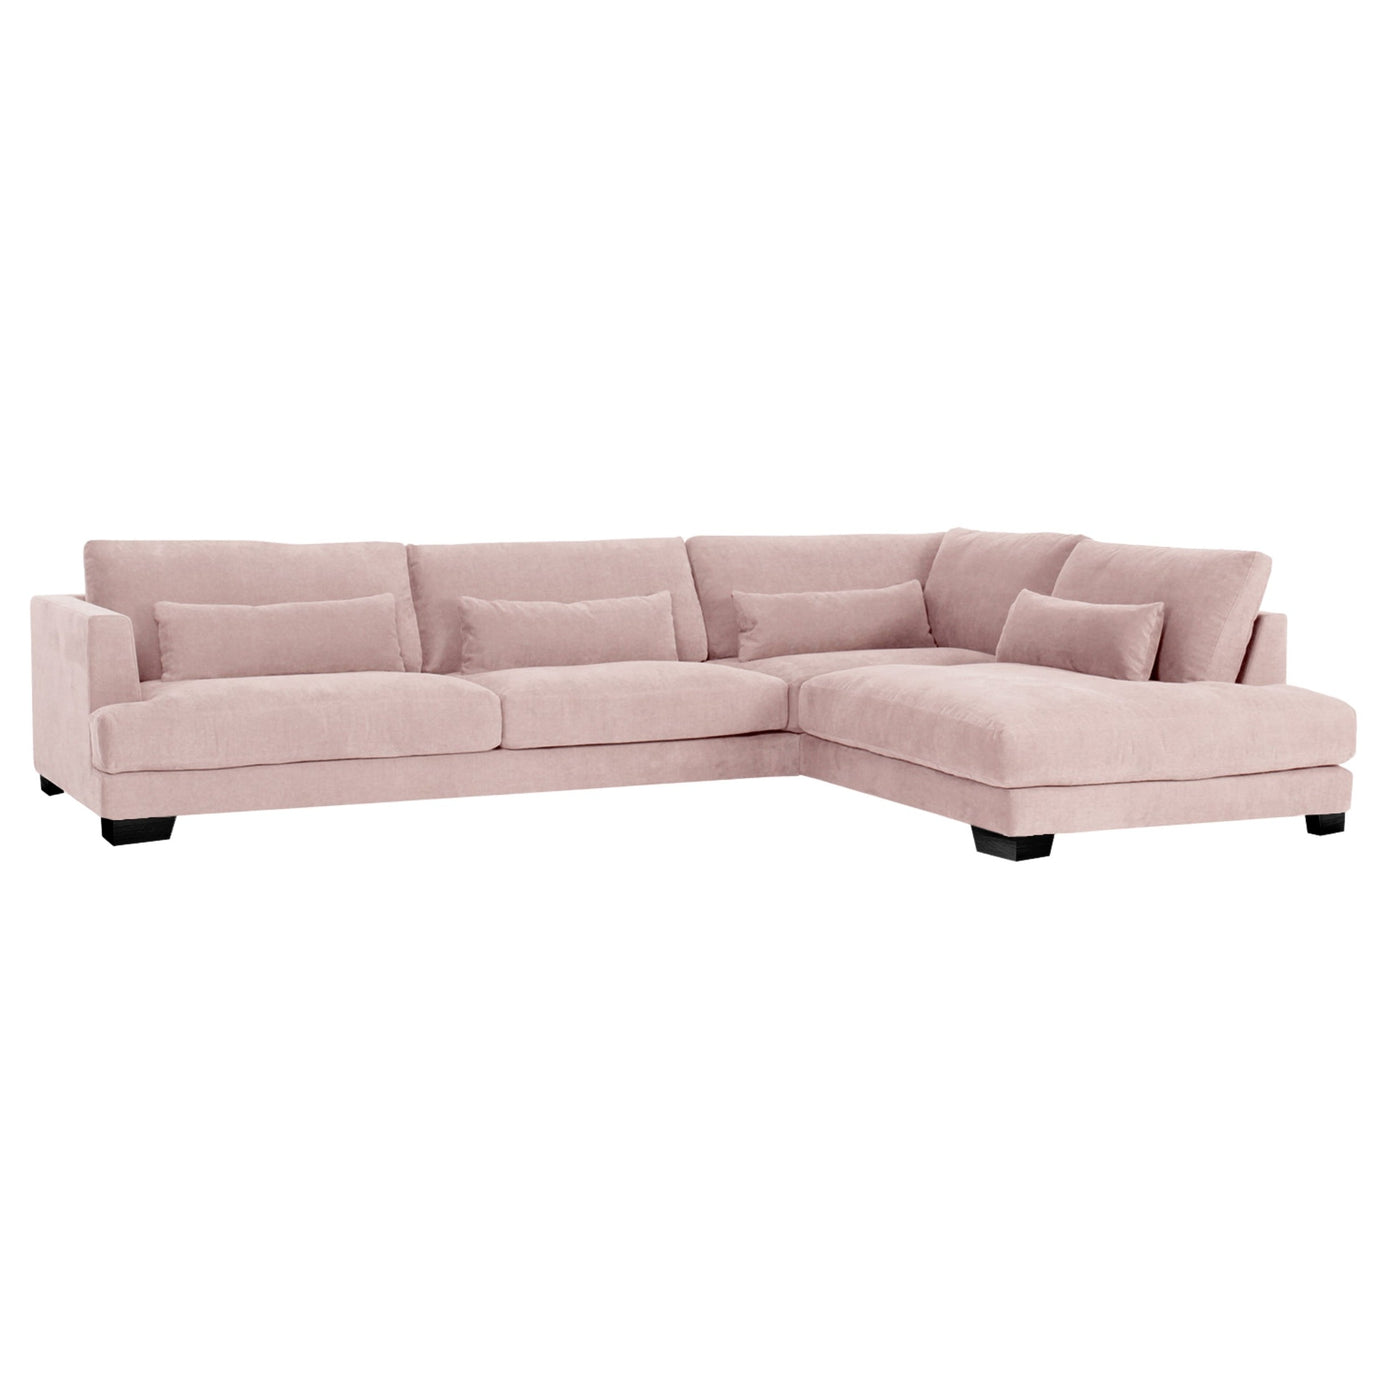 someday designs toft corner sofa in pure 04 nude pink with black legs RHF. #colour_pure-04-nude-pink